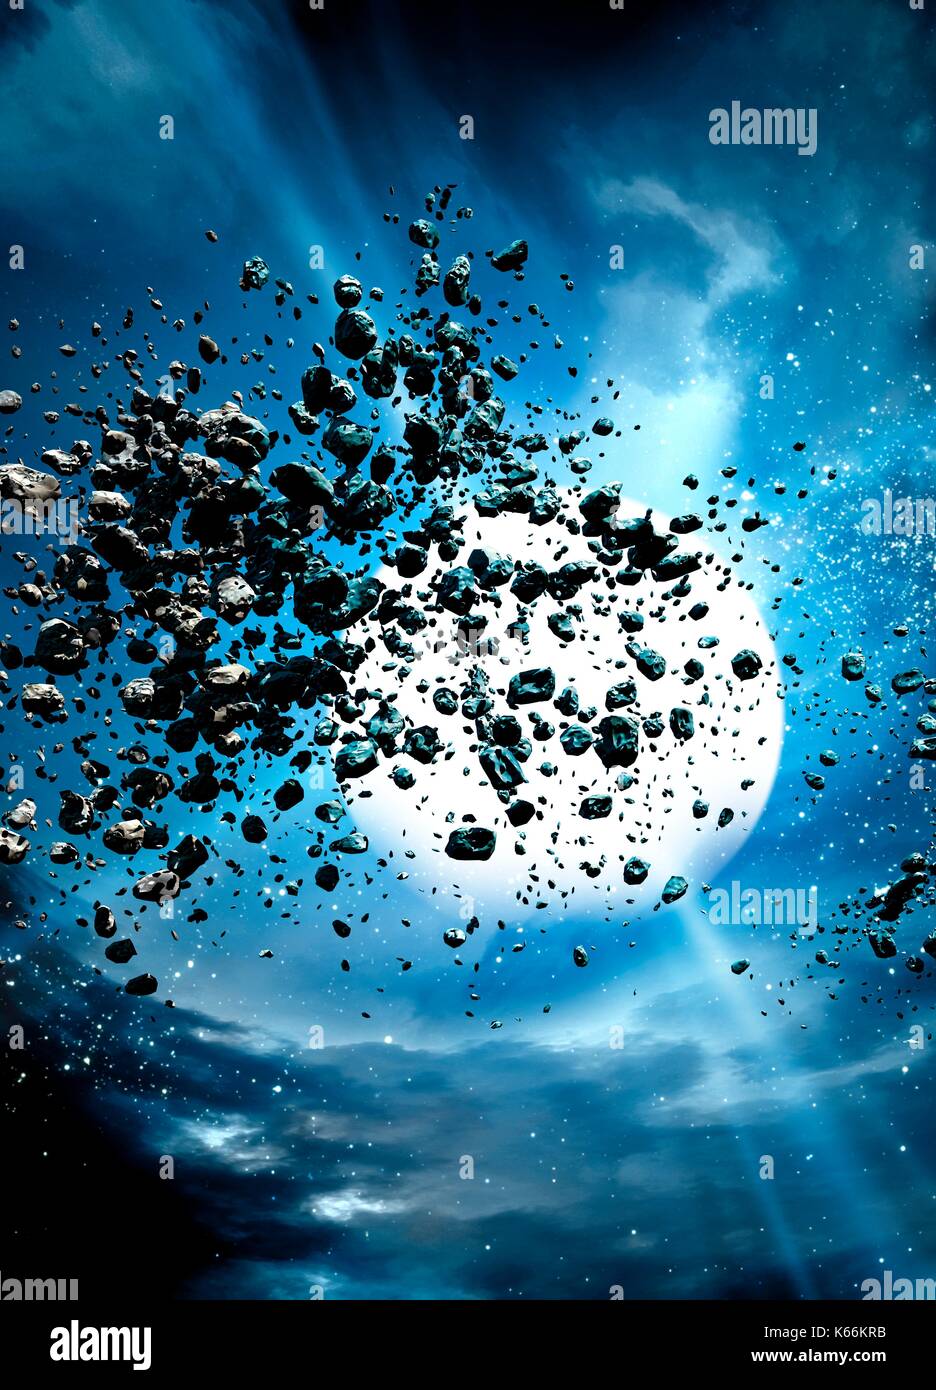 Debris from a white hole, illustration. Stock Photo